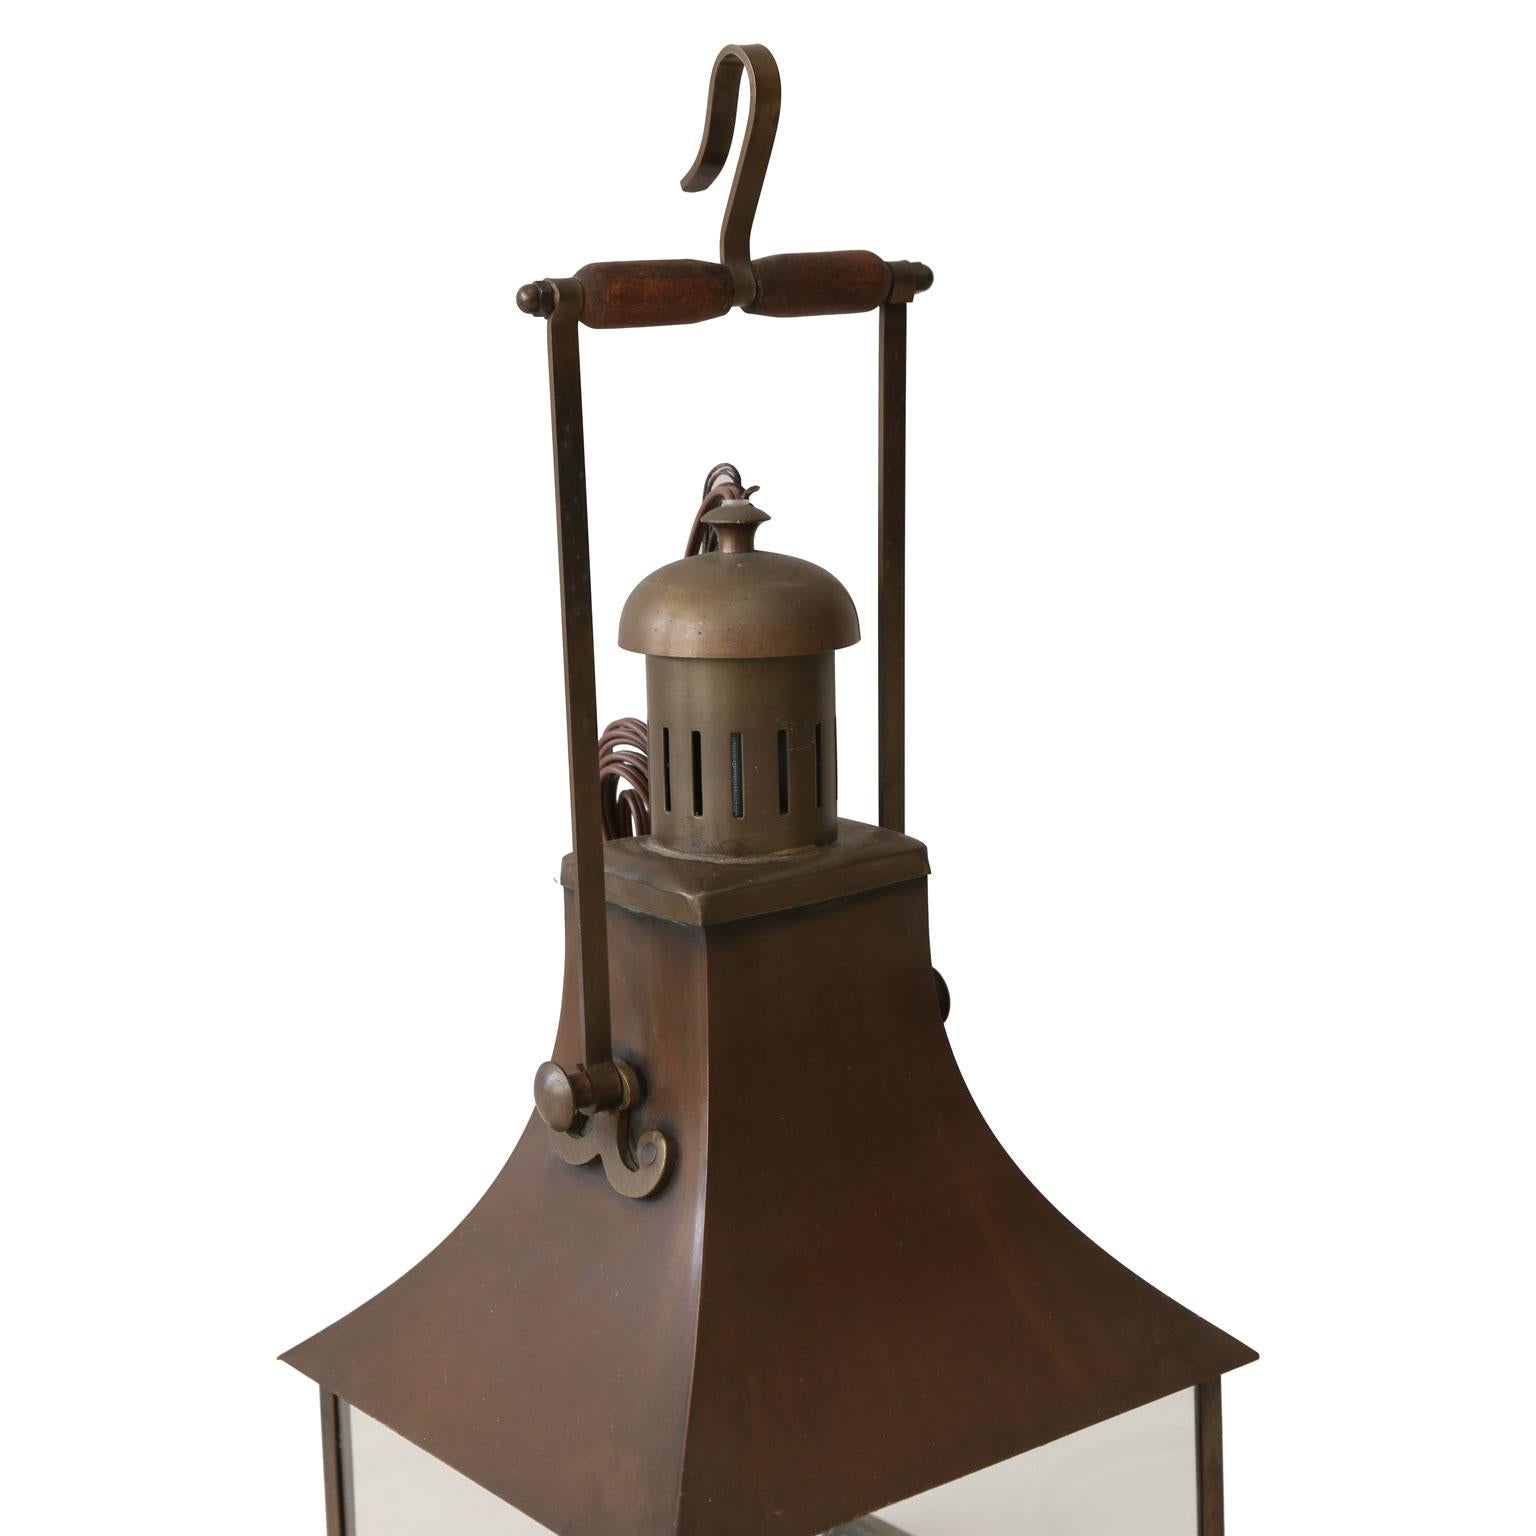 Three French antique tole lanterns with glazed panels and nice wooden handles. Newly-wired for single medium-base size bulbs. Include extra chain and original canopies. Sold individually and priced $1,700 each.